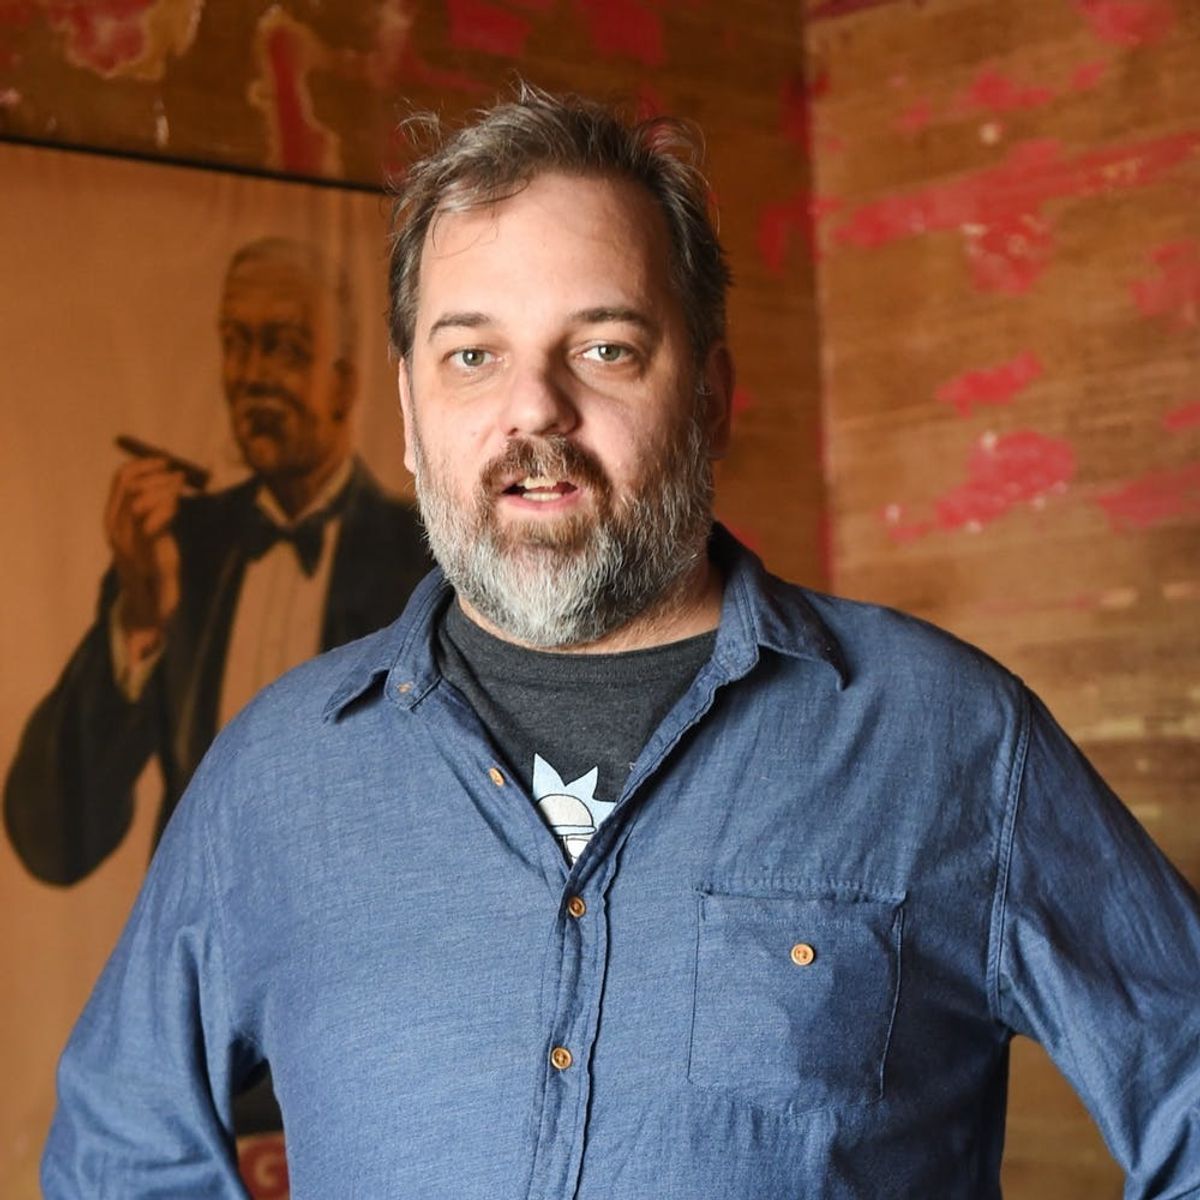 ‘Community’ Creator Dan Harmon’s Apology for Harassment Is Praised by Accused Megan Ganz